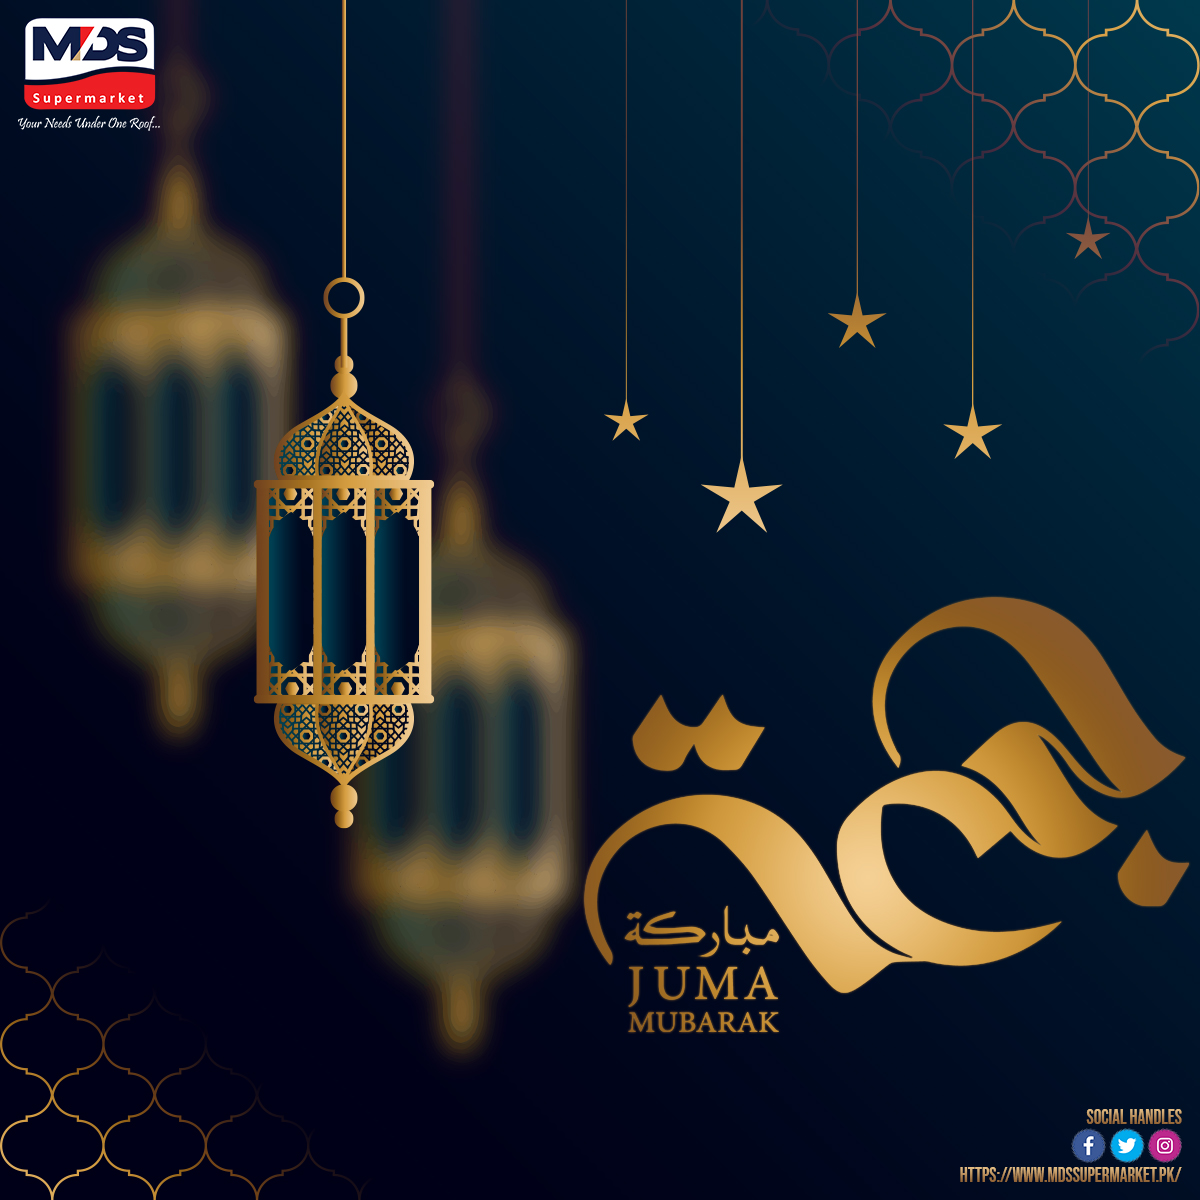 Jumma Mubarak from MDS Supermarket! 🌙 May this blessed day bring peace and blessings to your home. 
📍 Branch 1: Toghi Road, Quetta. Phone: (081-2823444)
📍 Branch 2: Quarry Road, Quetta. Phone: (081-2823420)

#JummaMubarak #BlessedFriday #MDSupermarket #Quetta #GroceryShopping